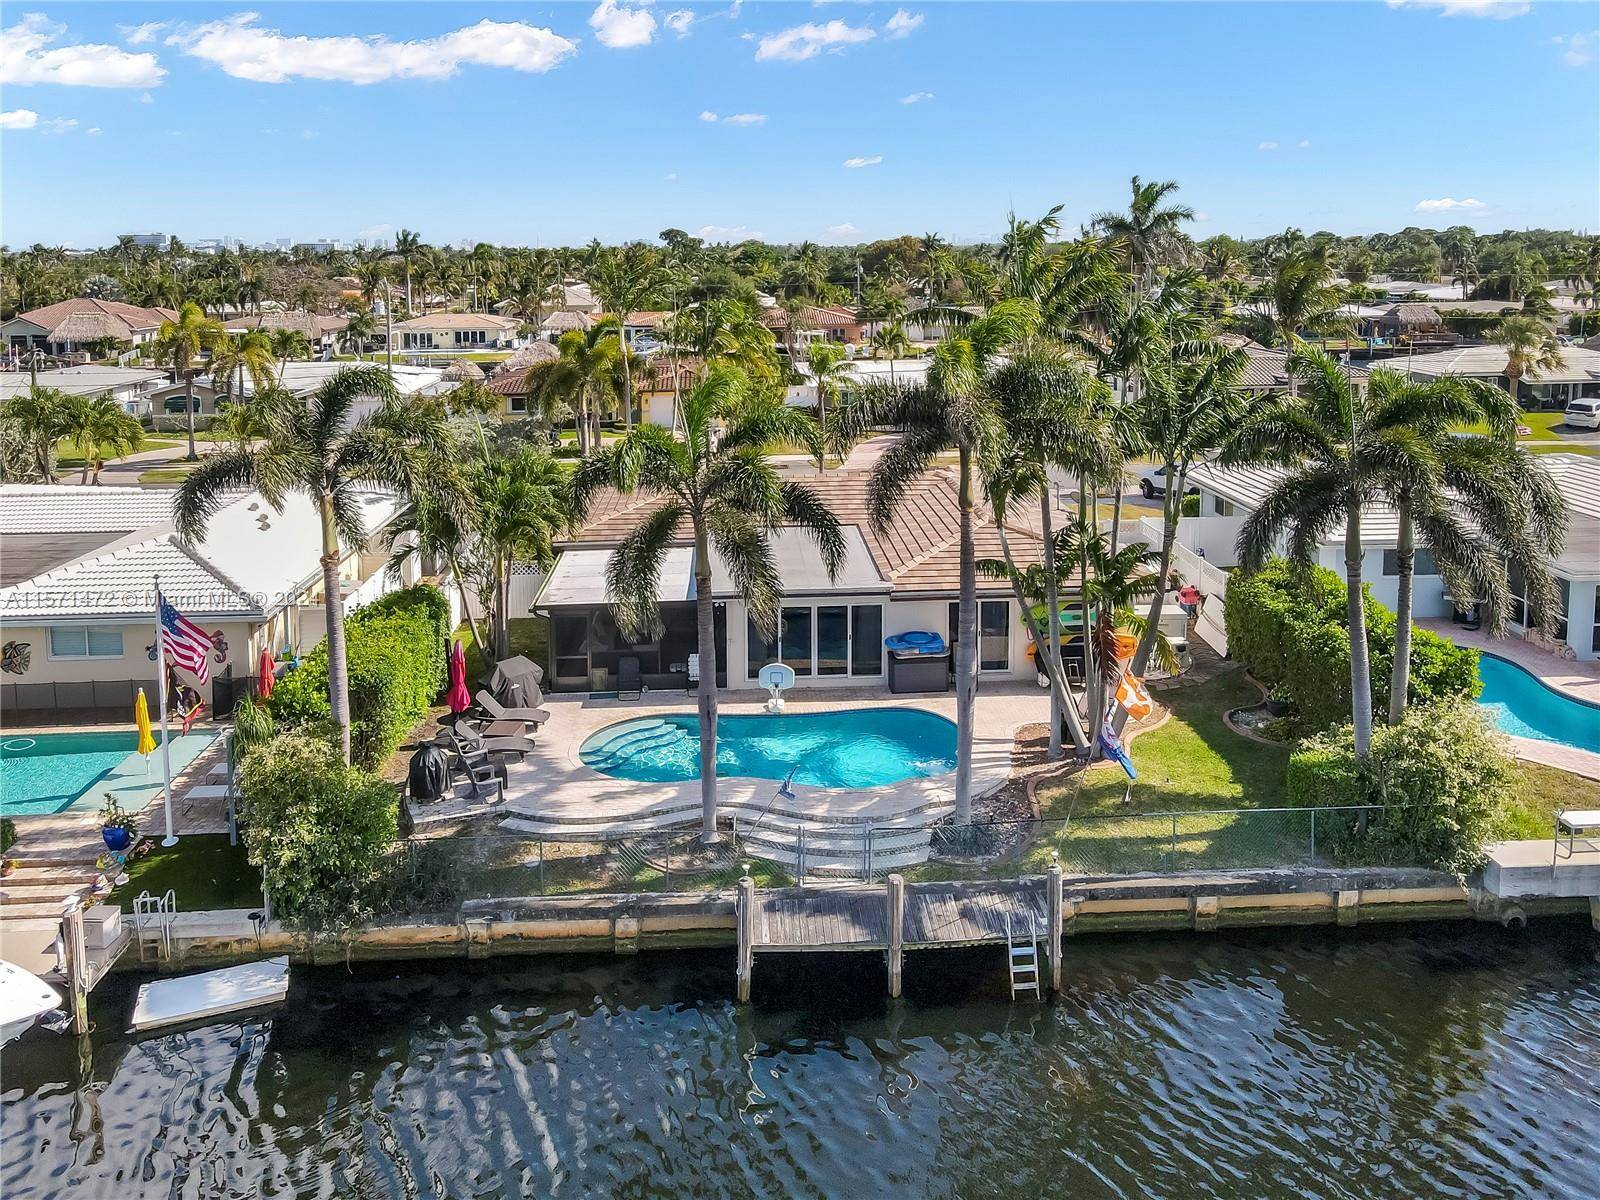 Beautiful waterfront home in a great neighborhood on a rare wide canal with amazing views.